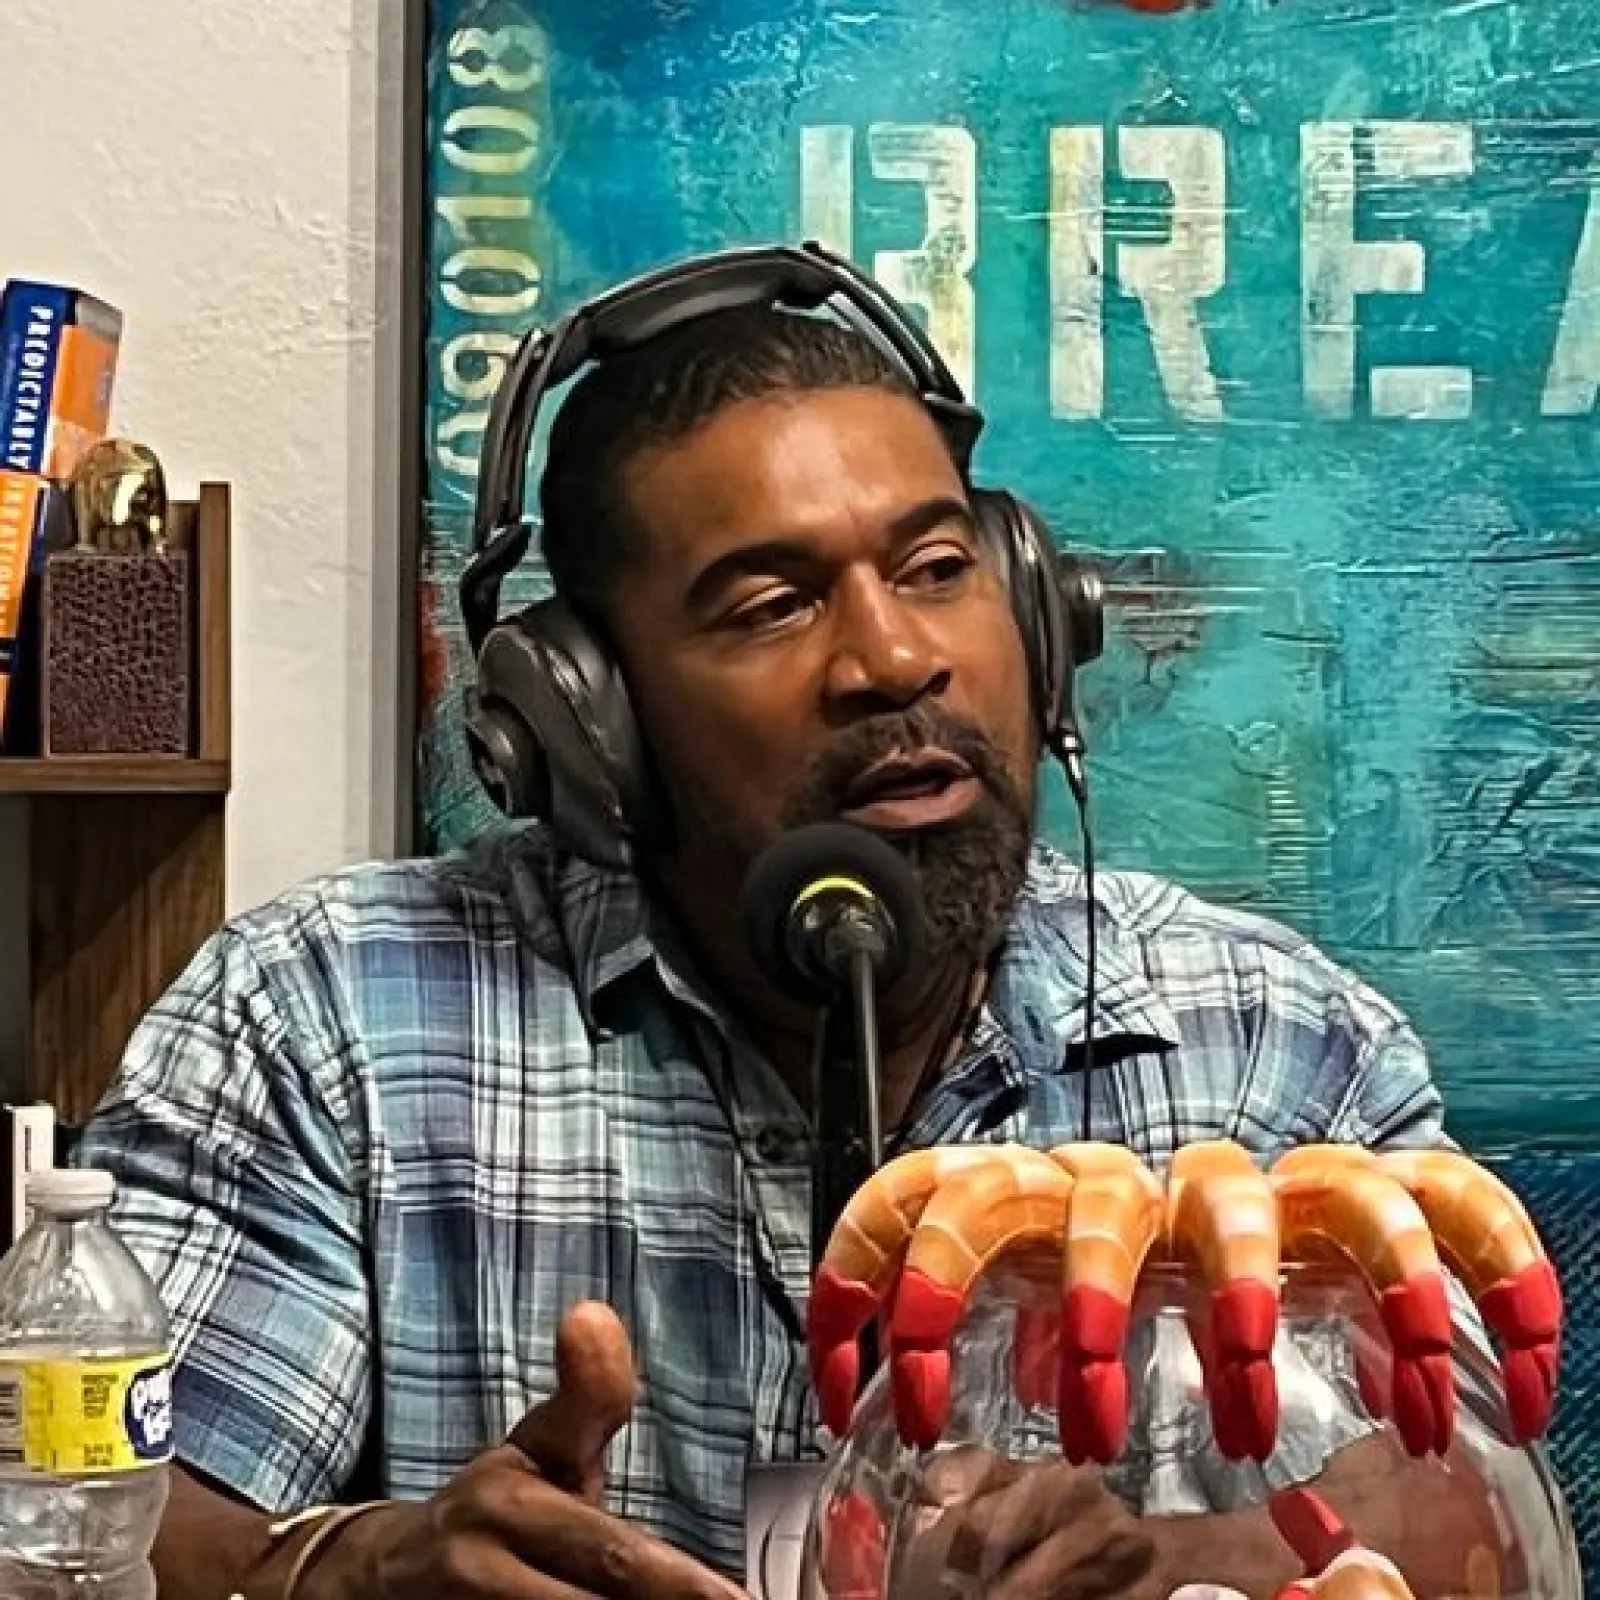 a person wearing headphones and holding a box of hot dogs